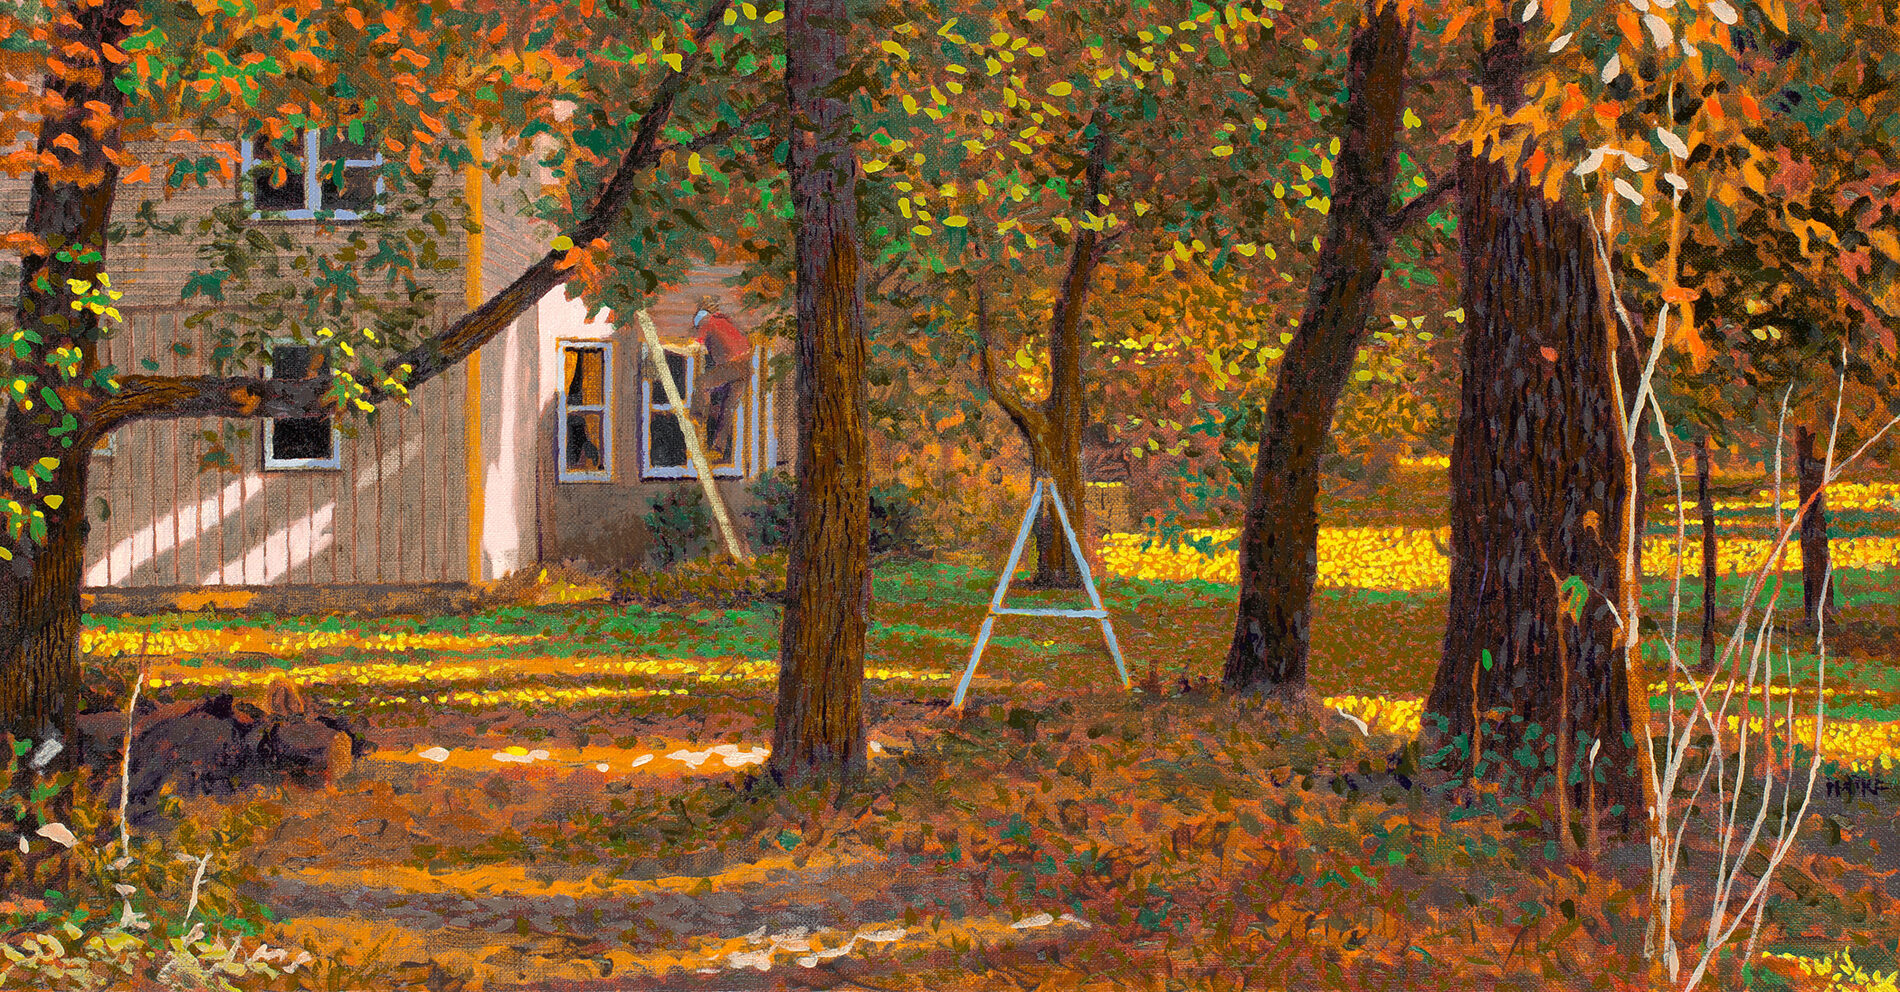 Shadowy autumn yard with trees and some step ladders.